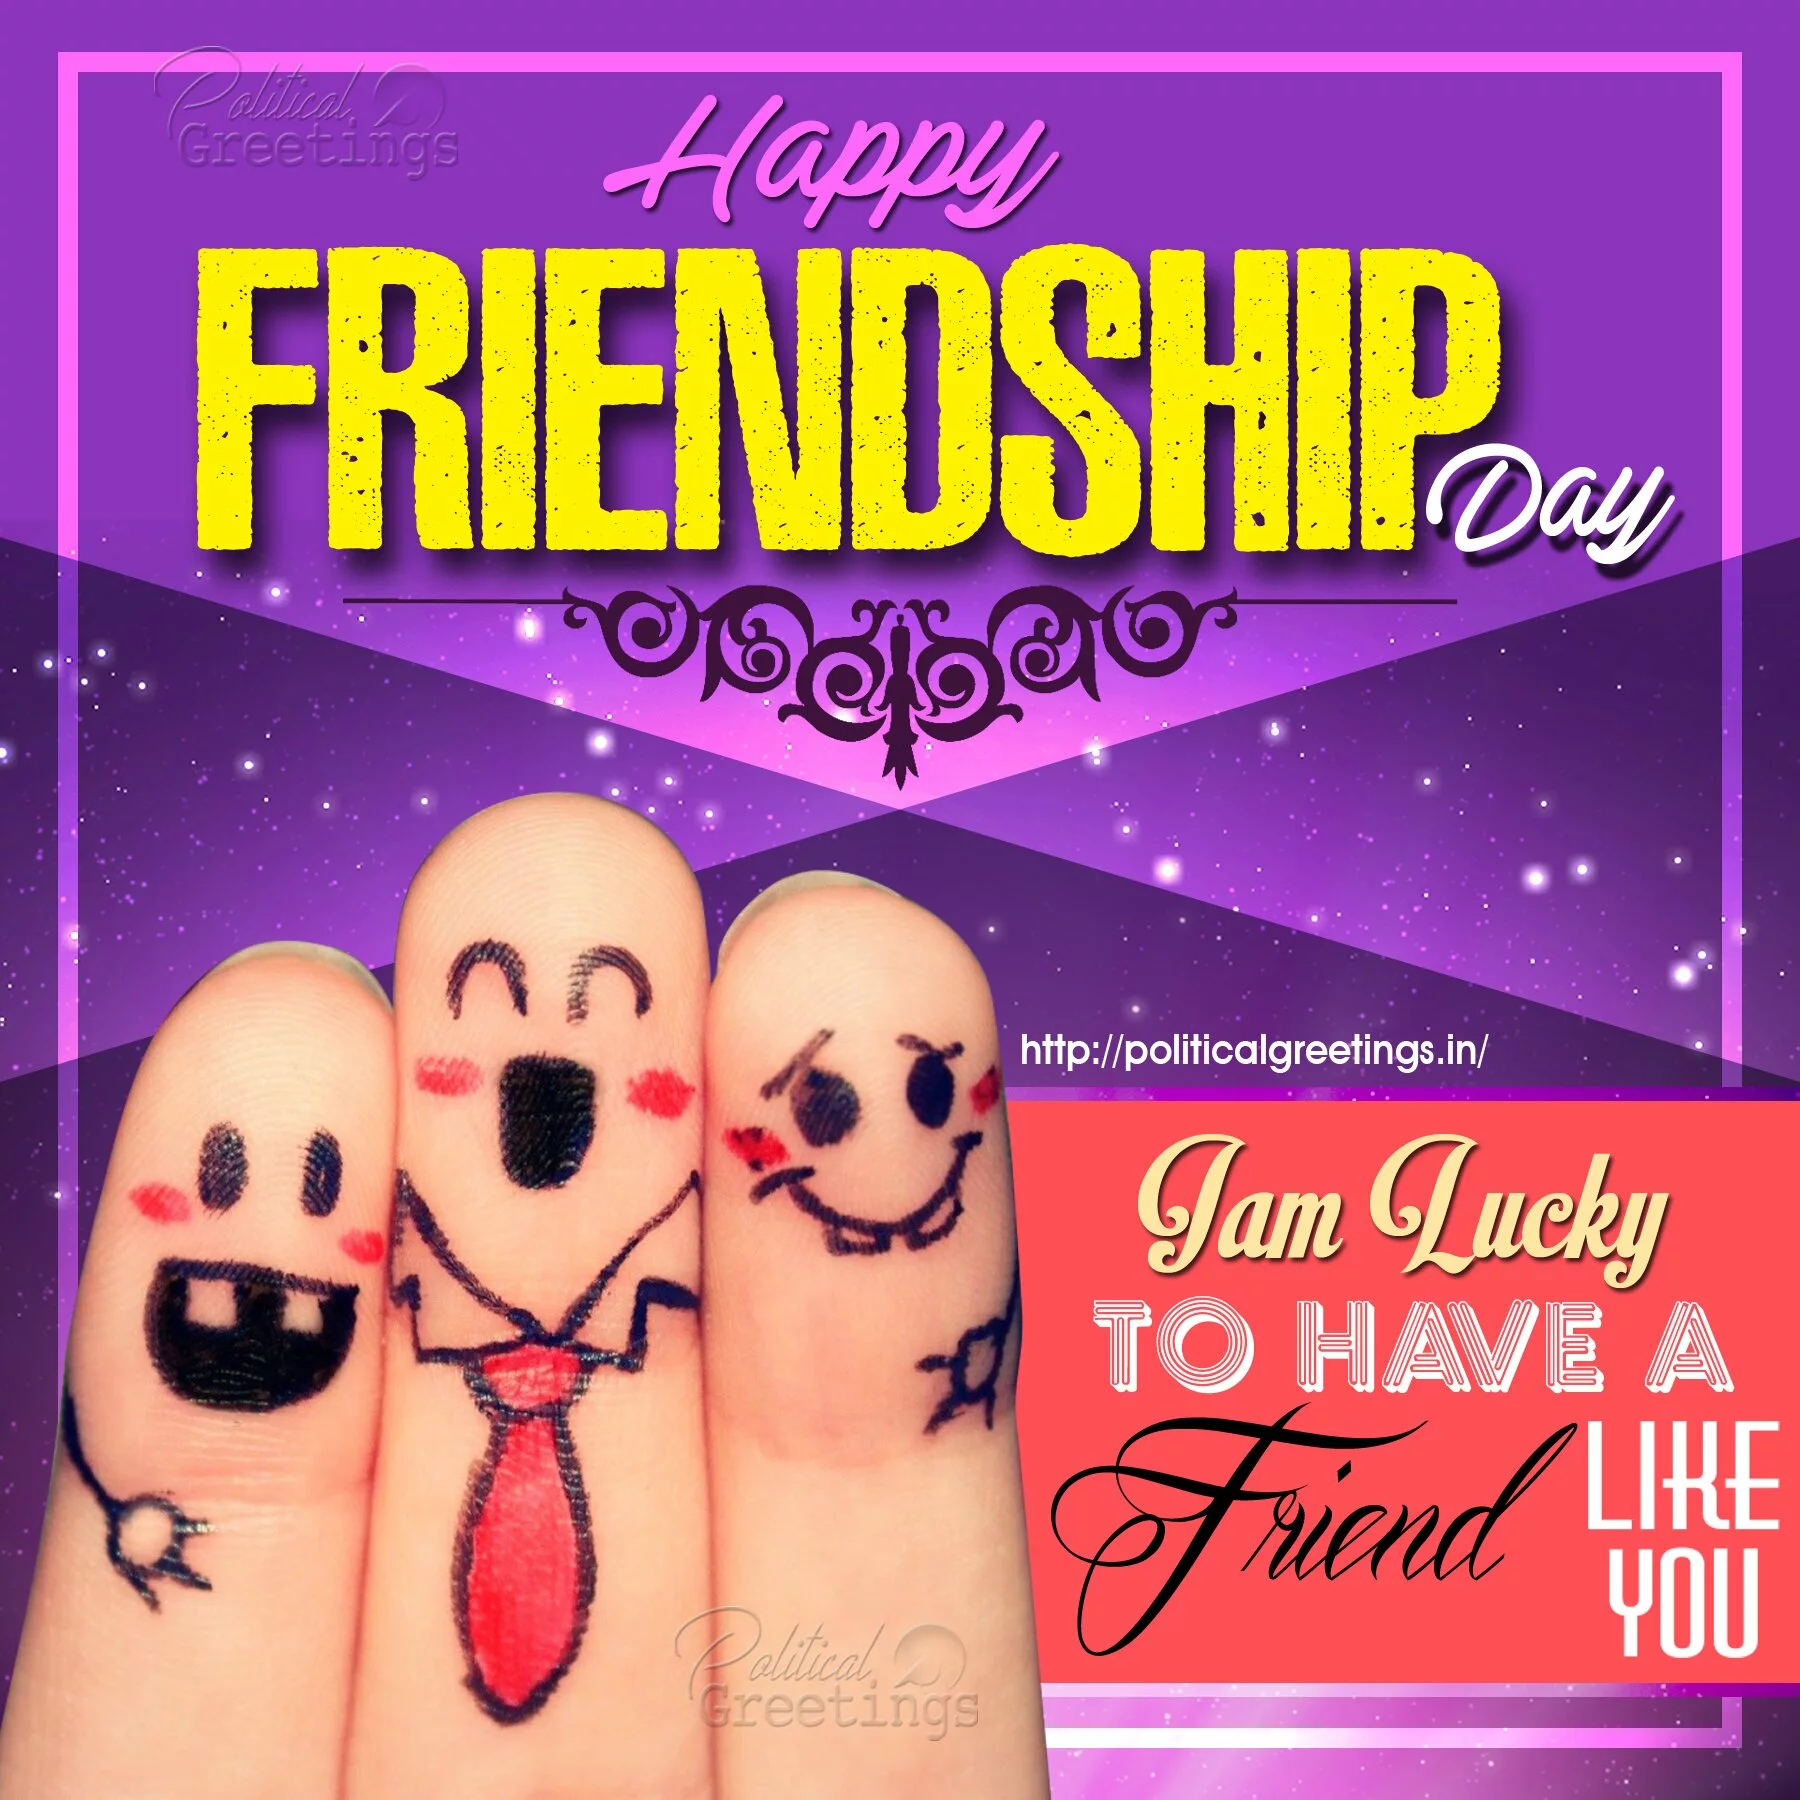 Happy Friendship day in telugu & english Quotes, Images, Messages for Facebook